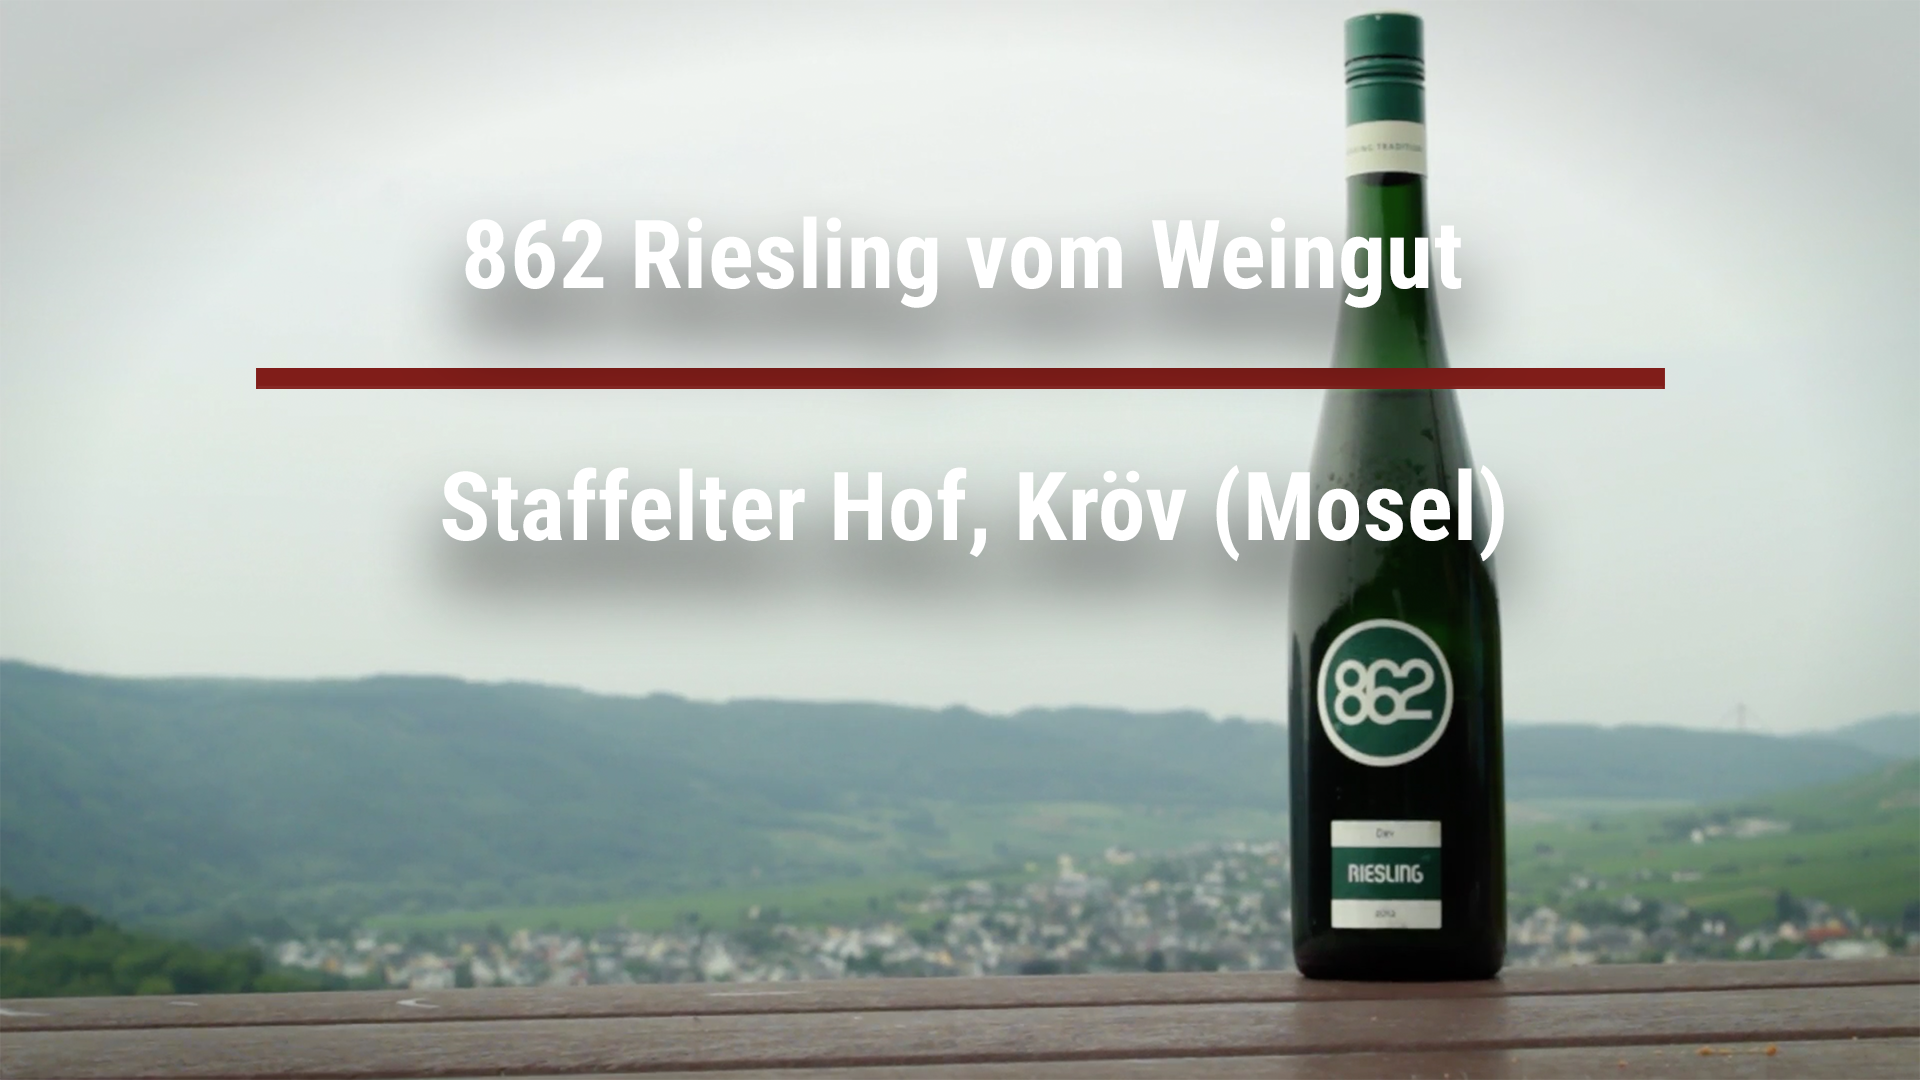 Read more about the article 862 Riesling from the Staffelter Hof winery, Kröv (Mosel)